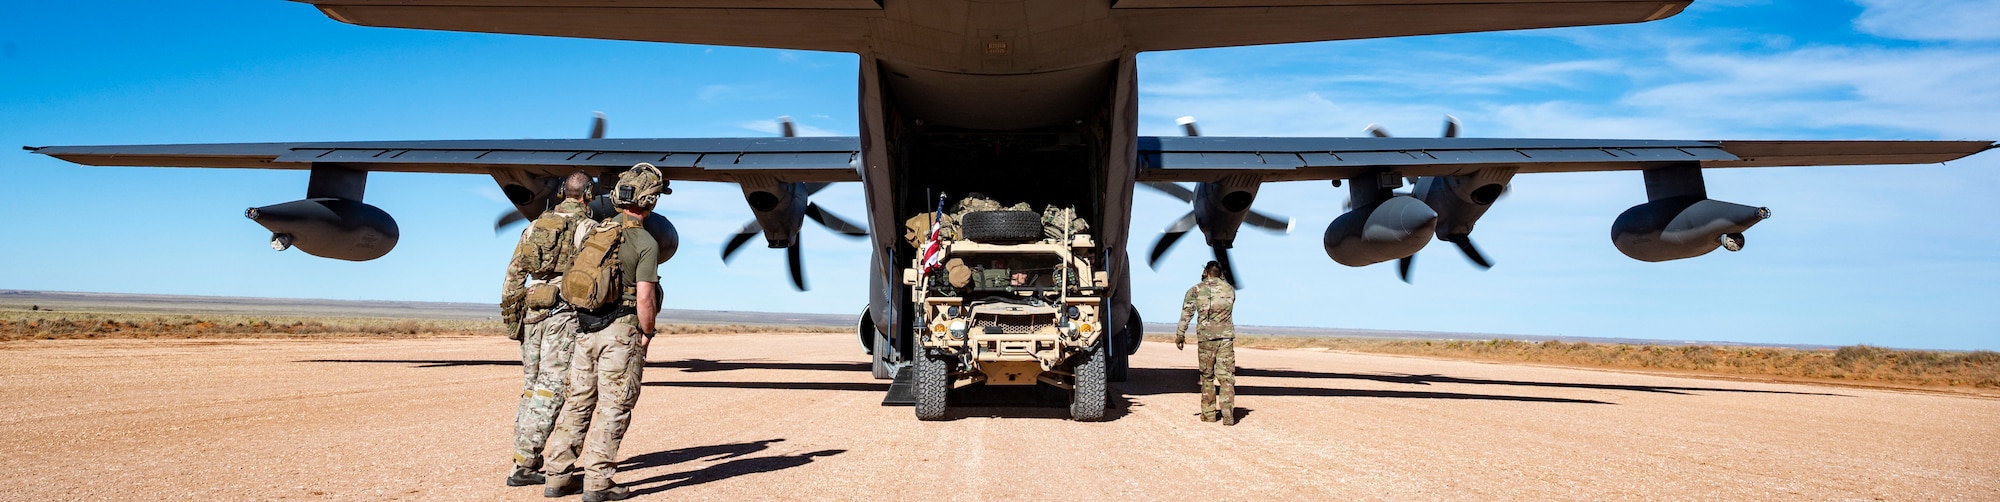 Airman 1st Class Karl Vincent Santos, 9th Special Operations Squadron loadmaster, prepares to load a GMV 1.1 onto a MC-130J Commando II during exercise Emerald Warrior 24 at Cannon Air Force Base, N.M., March 4th, 2024. Emerald Warrior provides annual, realistic, relevant, high-end pre-deployment training in a complex and evolving security environment using all aspects of live, virtual and constructive training assets. (U.S. Air Force photo by Staff Sgt. Aaron Irvin)